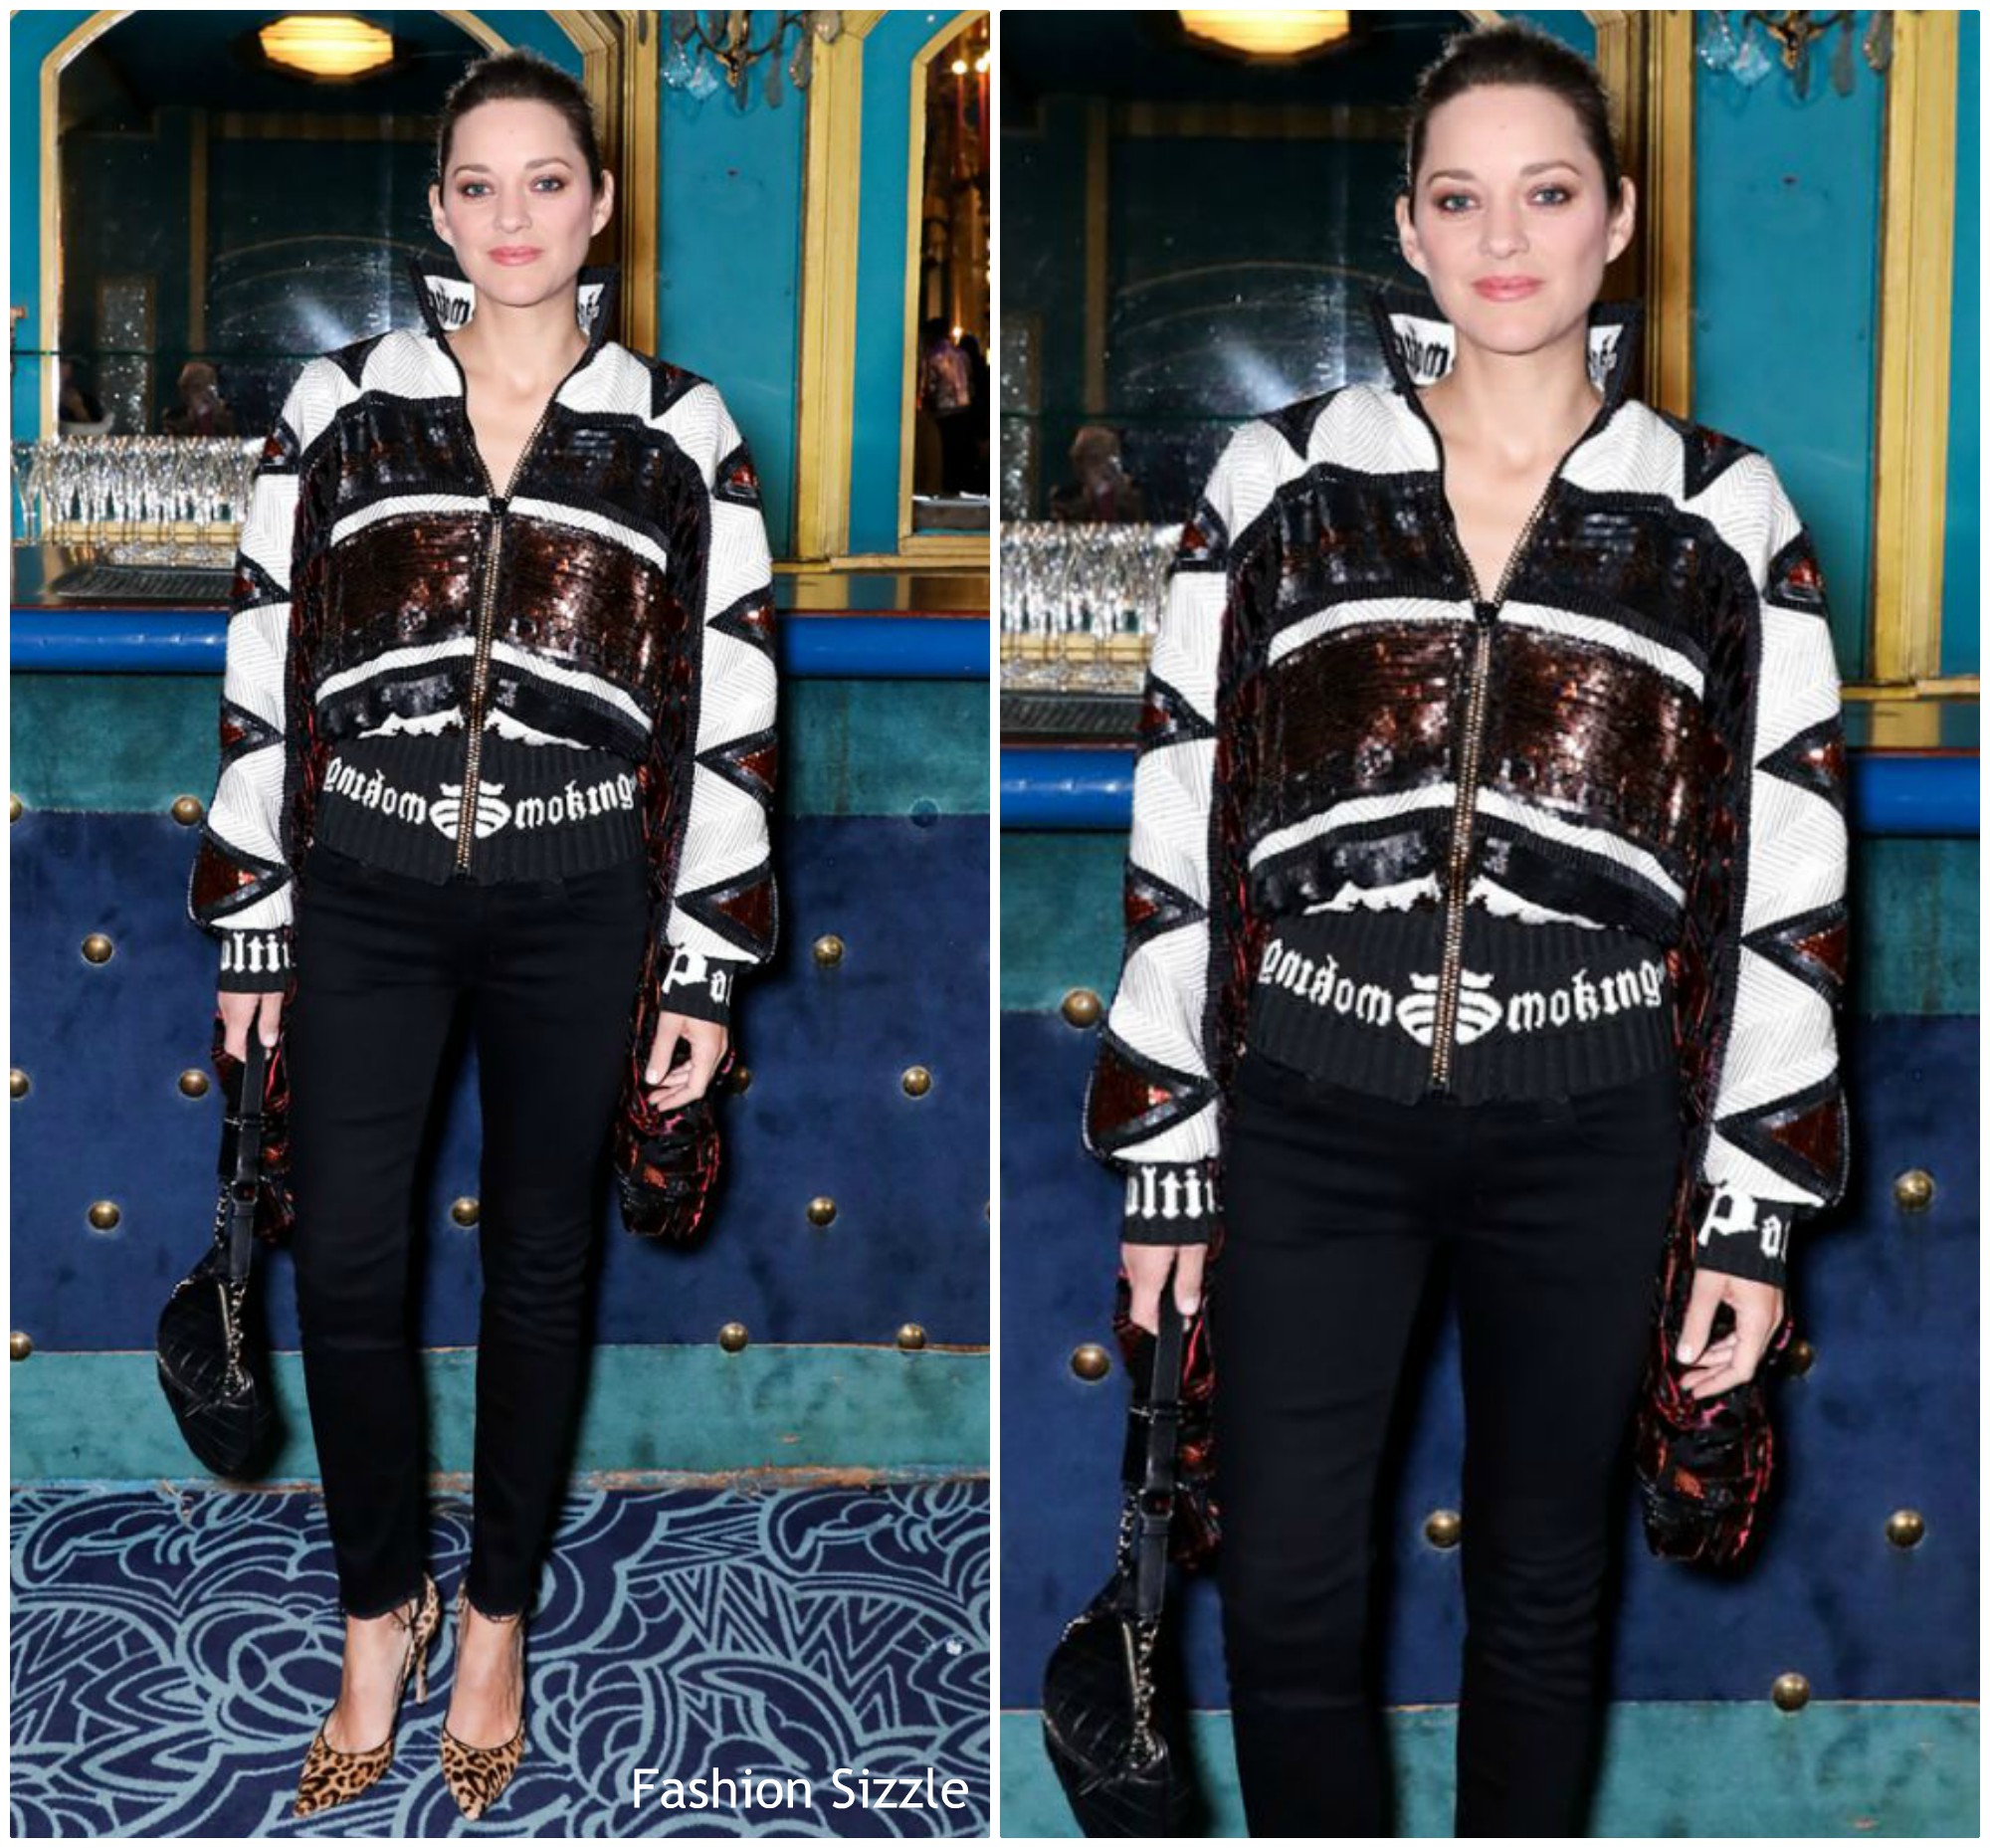 Marion Cotillard in Jean Paul Gaulthier Couture @ the Fashion Freak Show